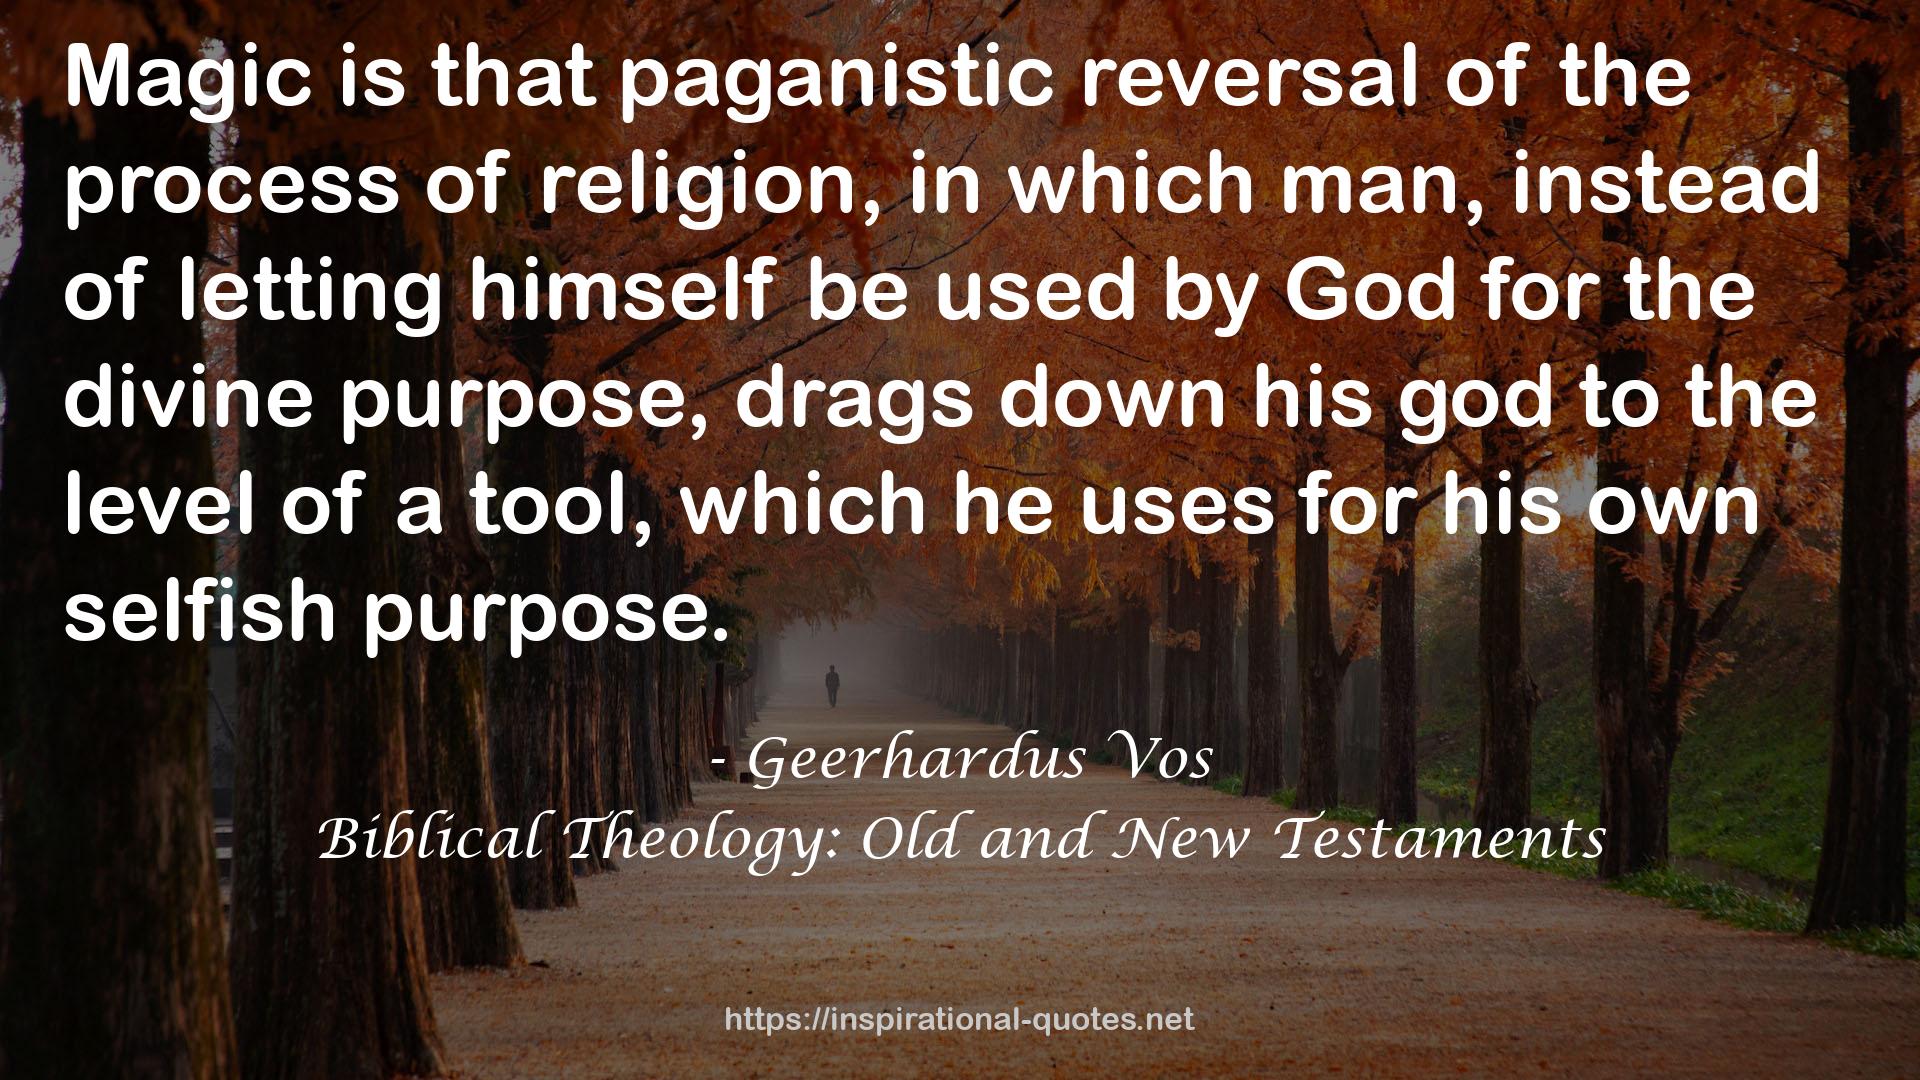 Biblical Theology: Old and New Testaments QUOTES